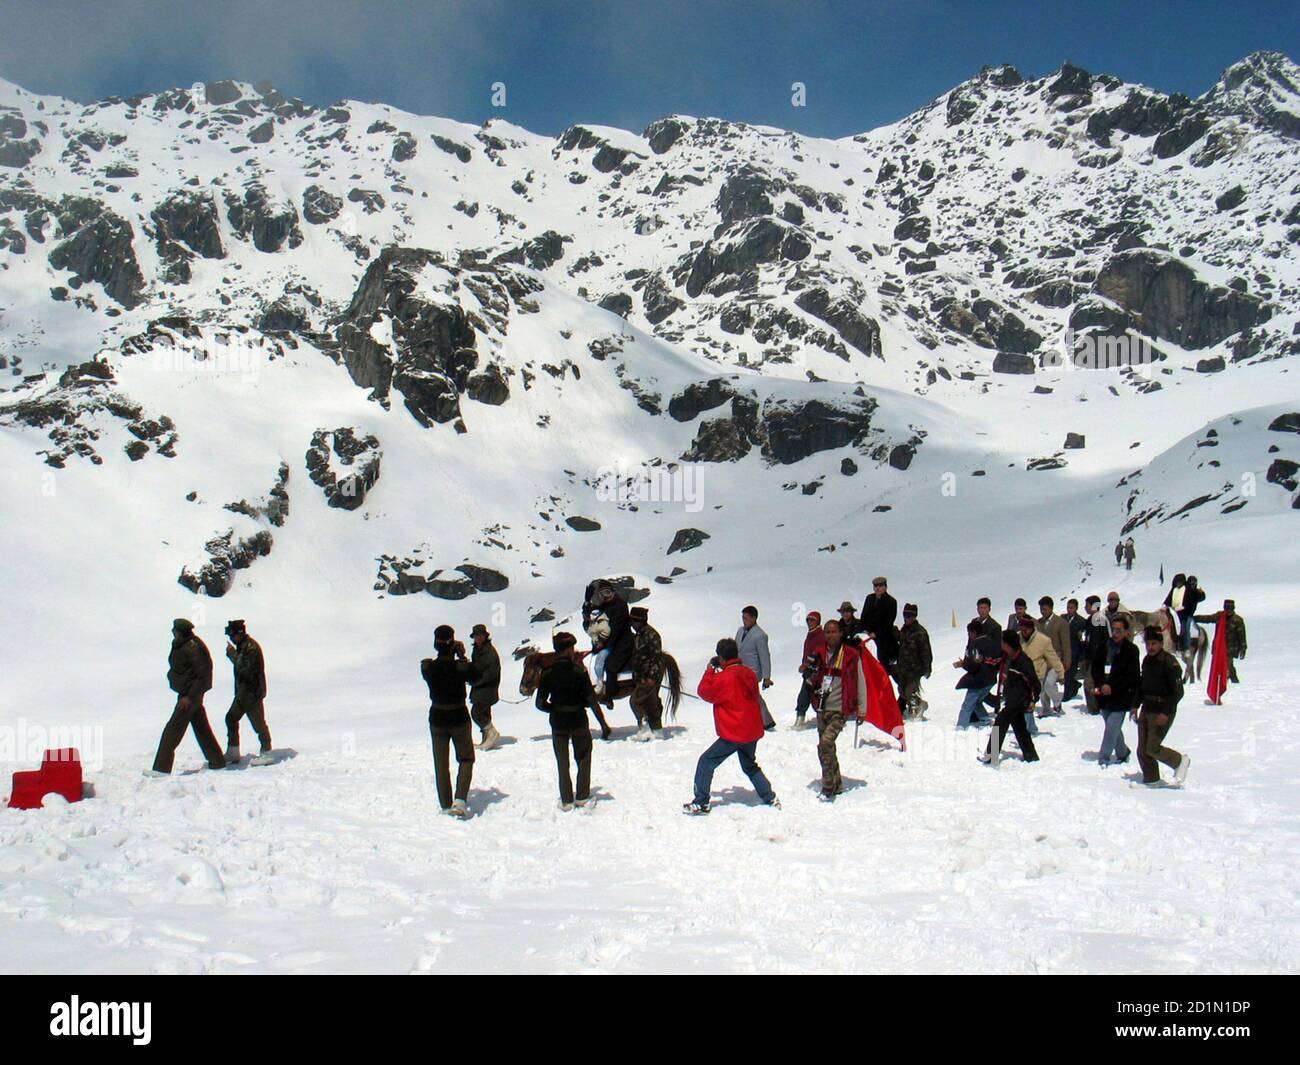 Indian tourists walk on snow at the 4,310 metre high Nathu-la pass on the country's north-eastern border with China in this April 9, 2005 file photo. Just a few yards away bulldozers on both sides of the frontline are building not fortifications but a road, to connect India and China and reopen a historic trade route. New Delhi and Beijing plan to reopen the Nathu-la pass in June after more than 40 years, a potent symbol of rapprochement between Asian giants who fought a Himalayan war in 1962. Picture taken April 9, 2005.  To match feature INDIA CHINA TRADE. REUTERS/Rupak De Chowdhuri/Files (I Stock Photo